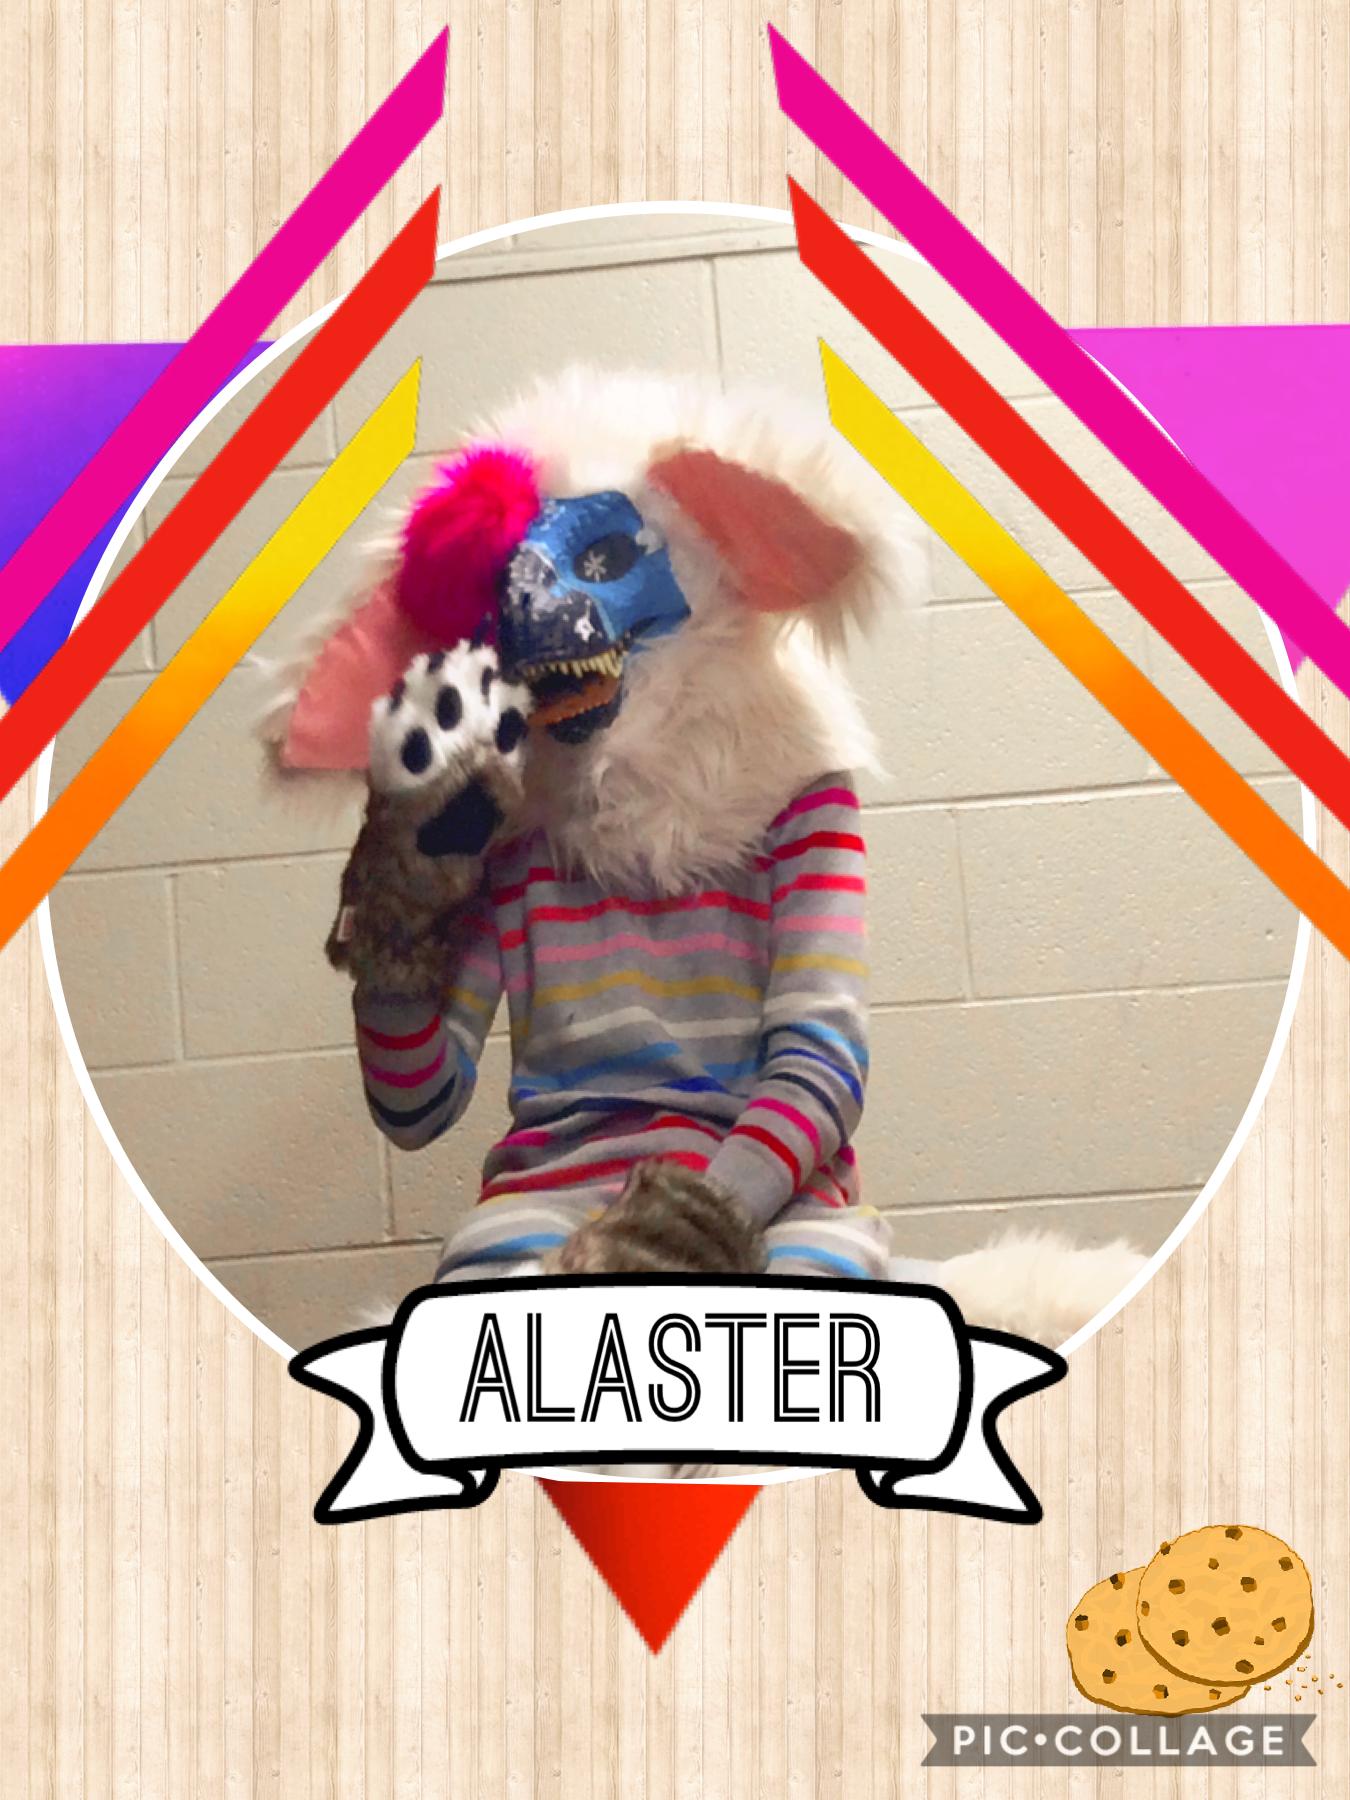 This is Alaster!